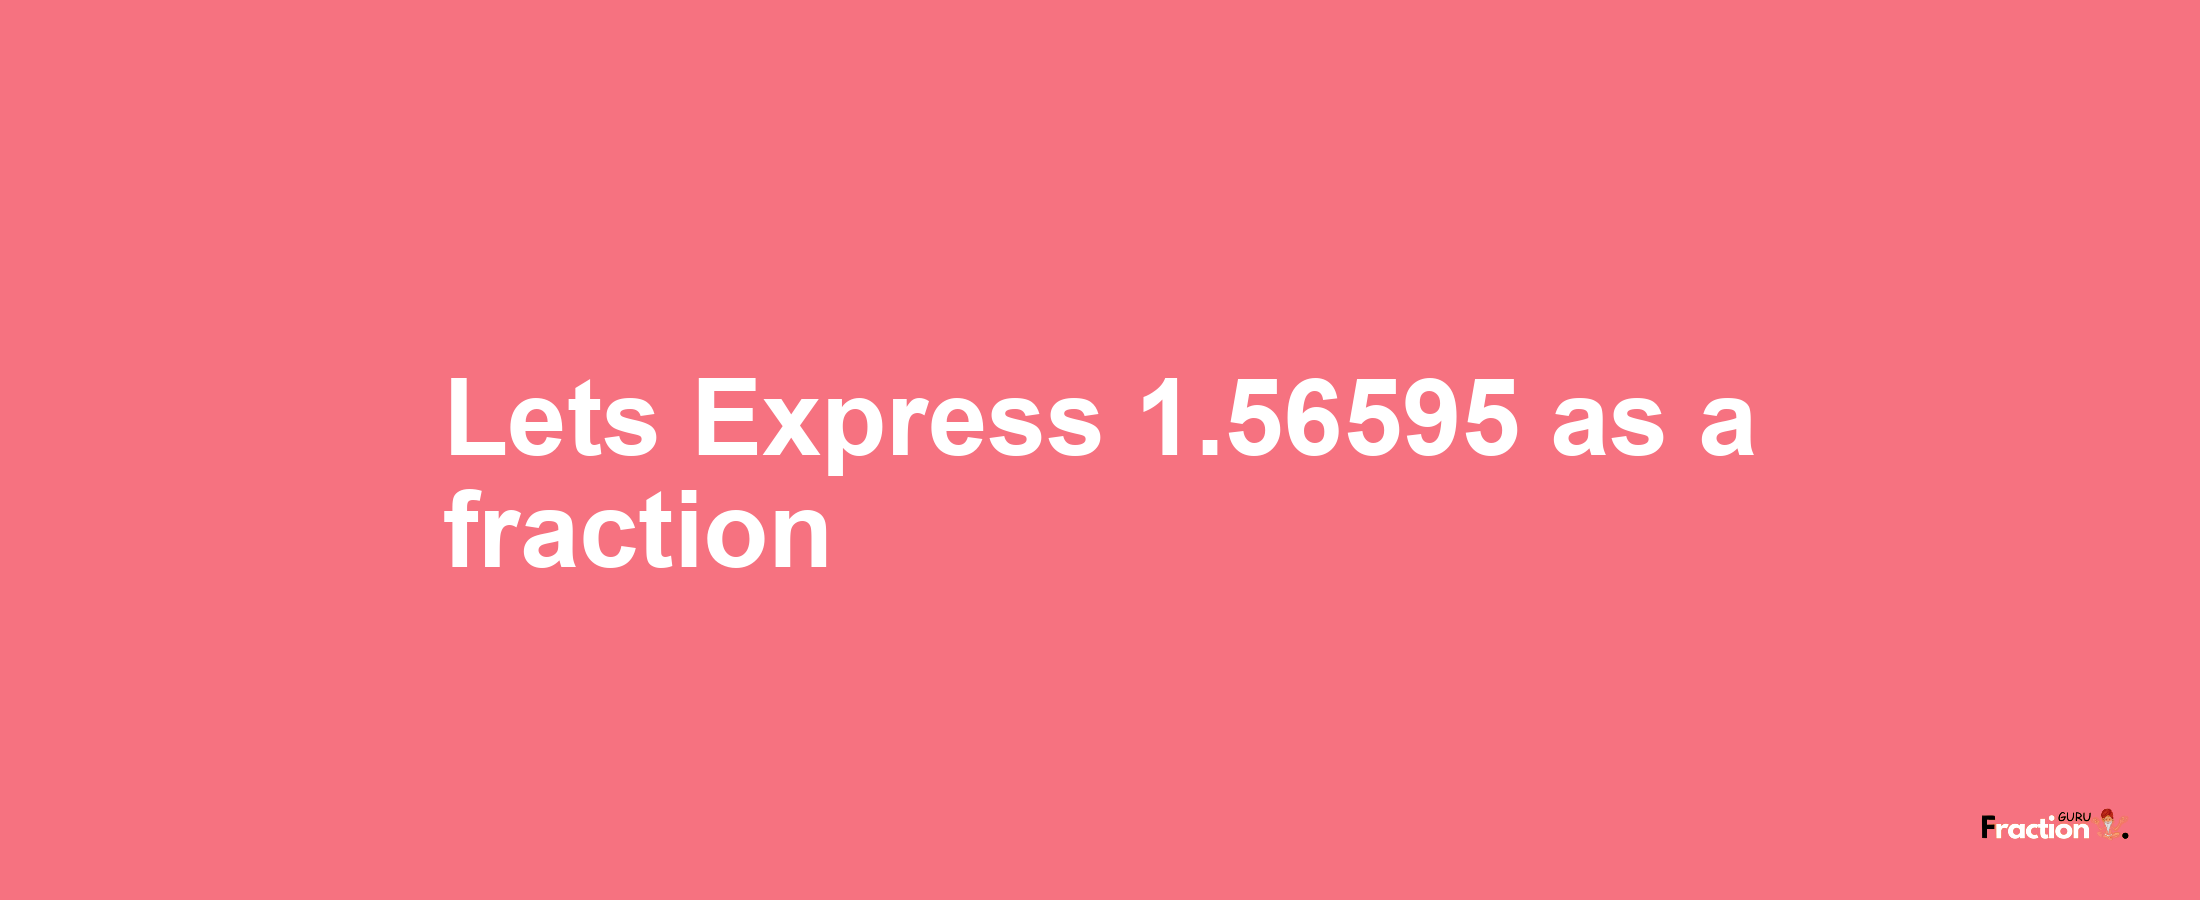 Lets Express 1.56595 as afraction